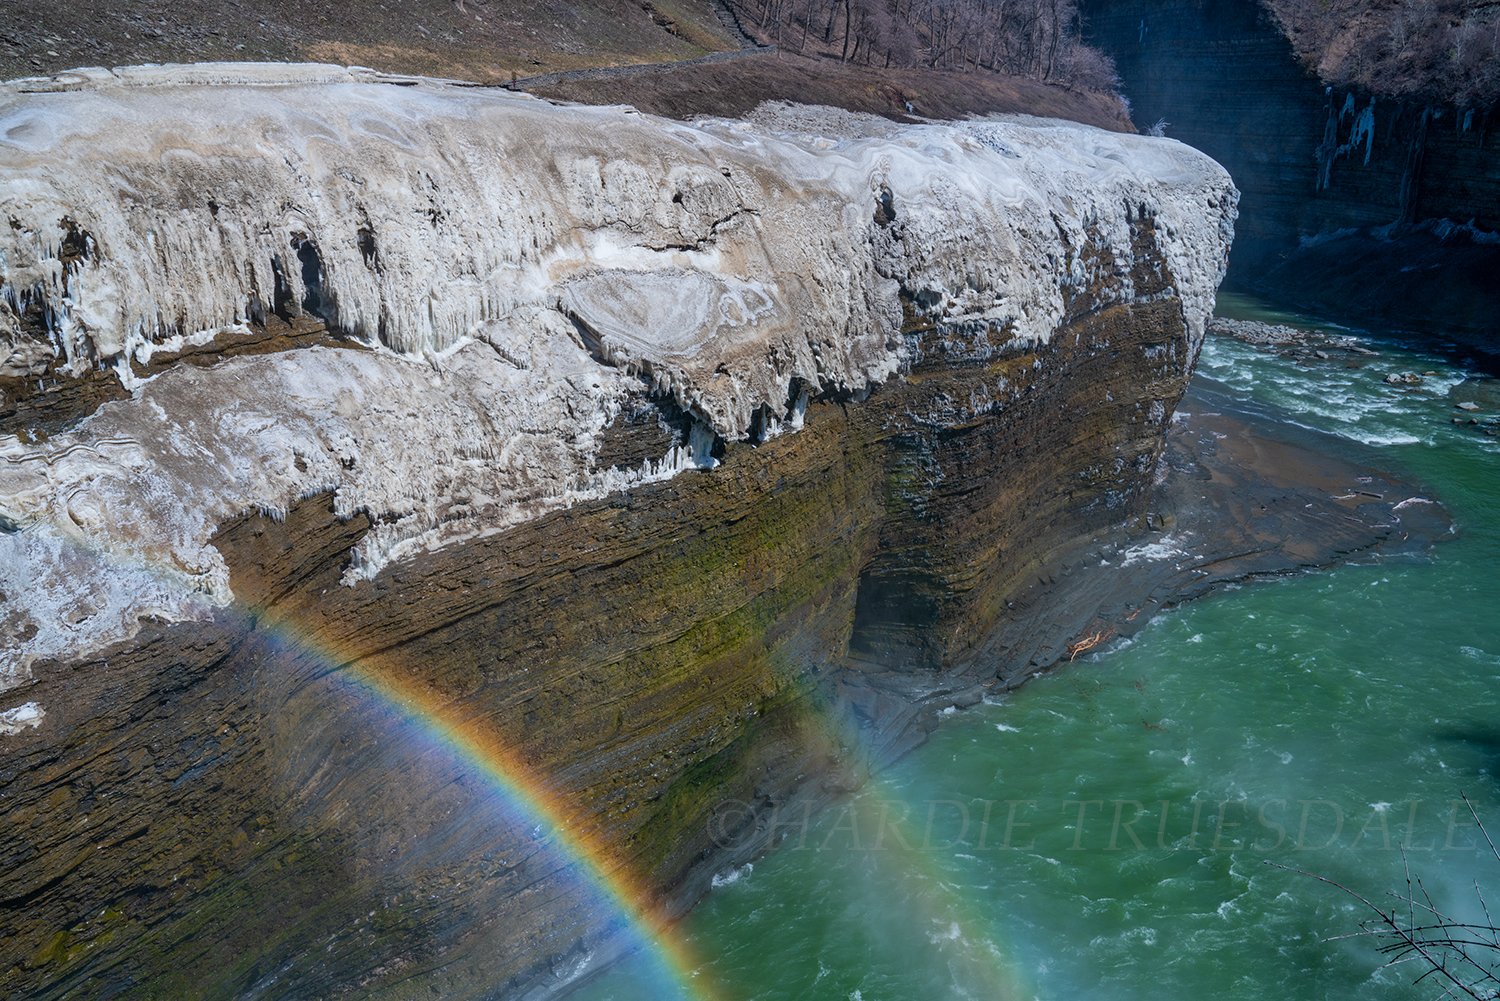 WNY#78 Winter Rainbow, Middle Falls Gorge, Letchworth State Park